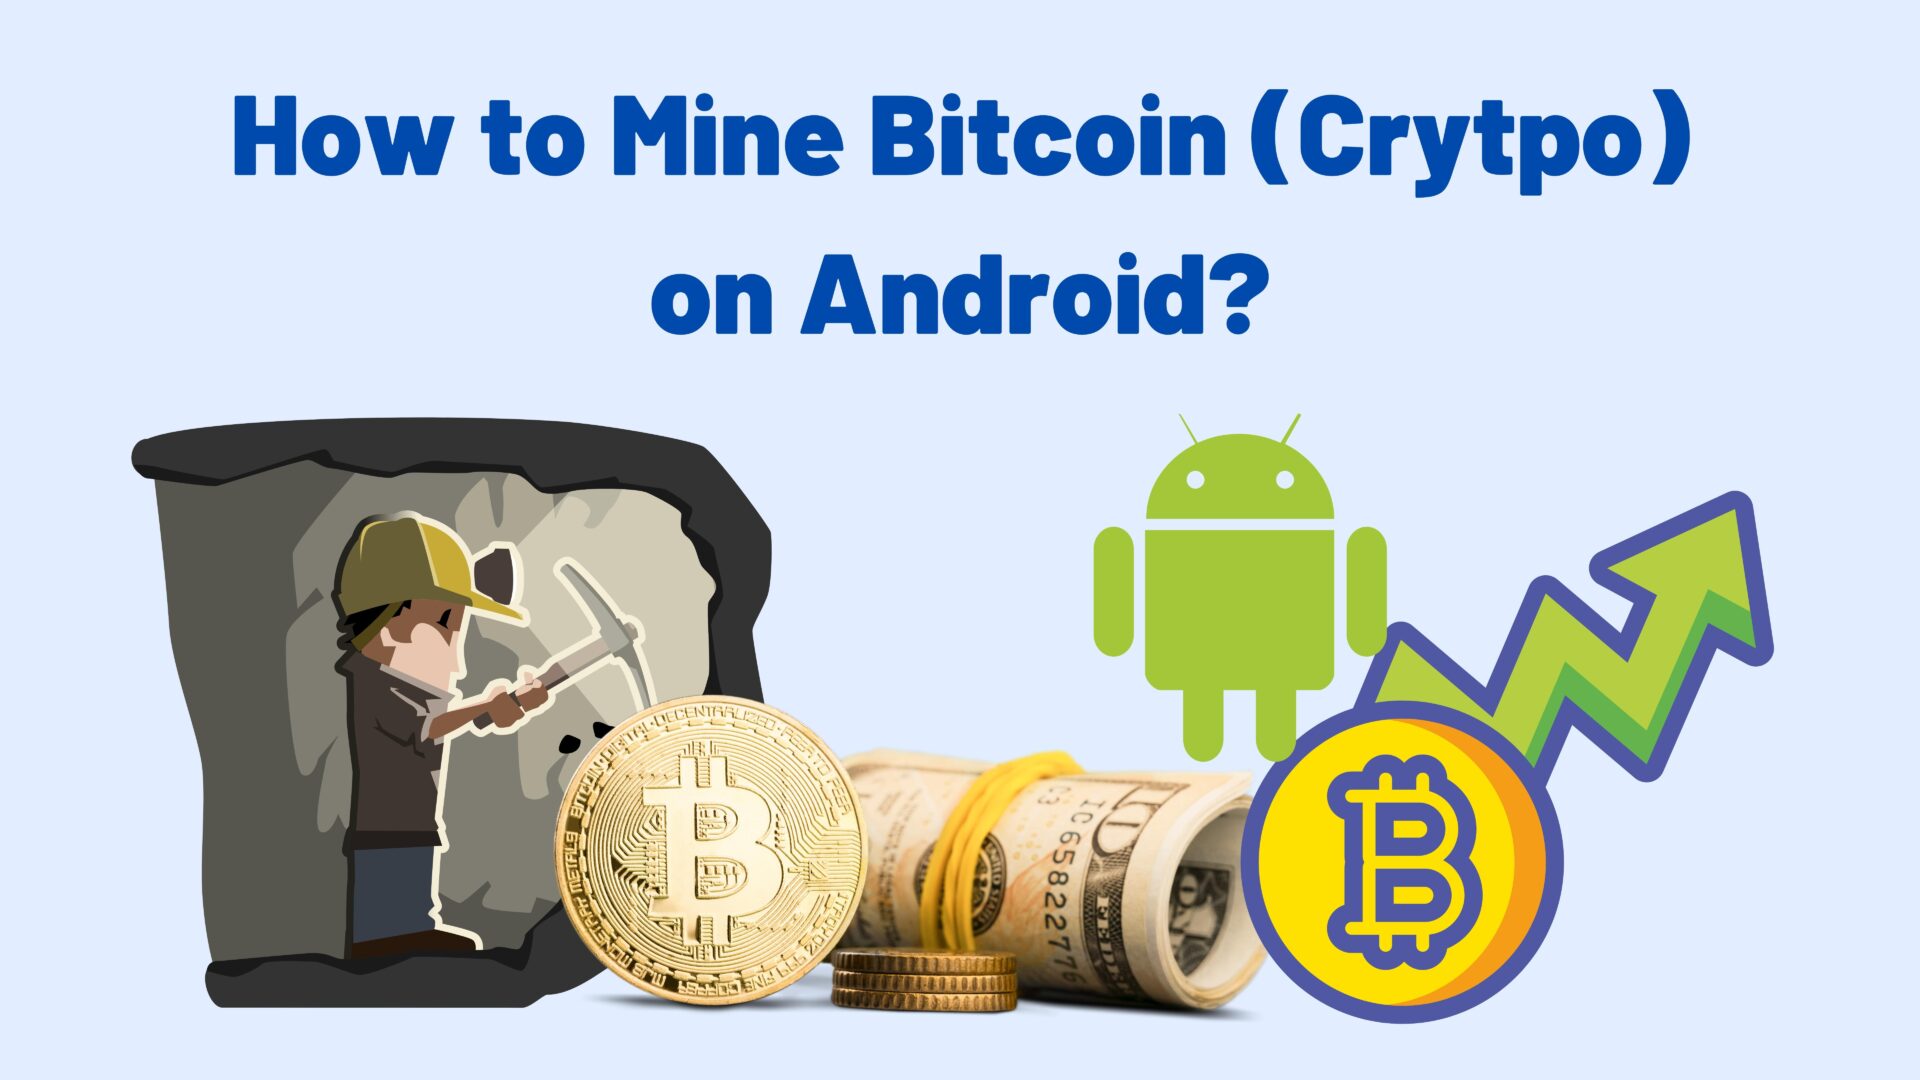 How to Mine Bitcoin (Crytpo) on Android?